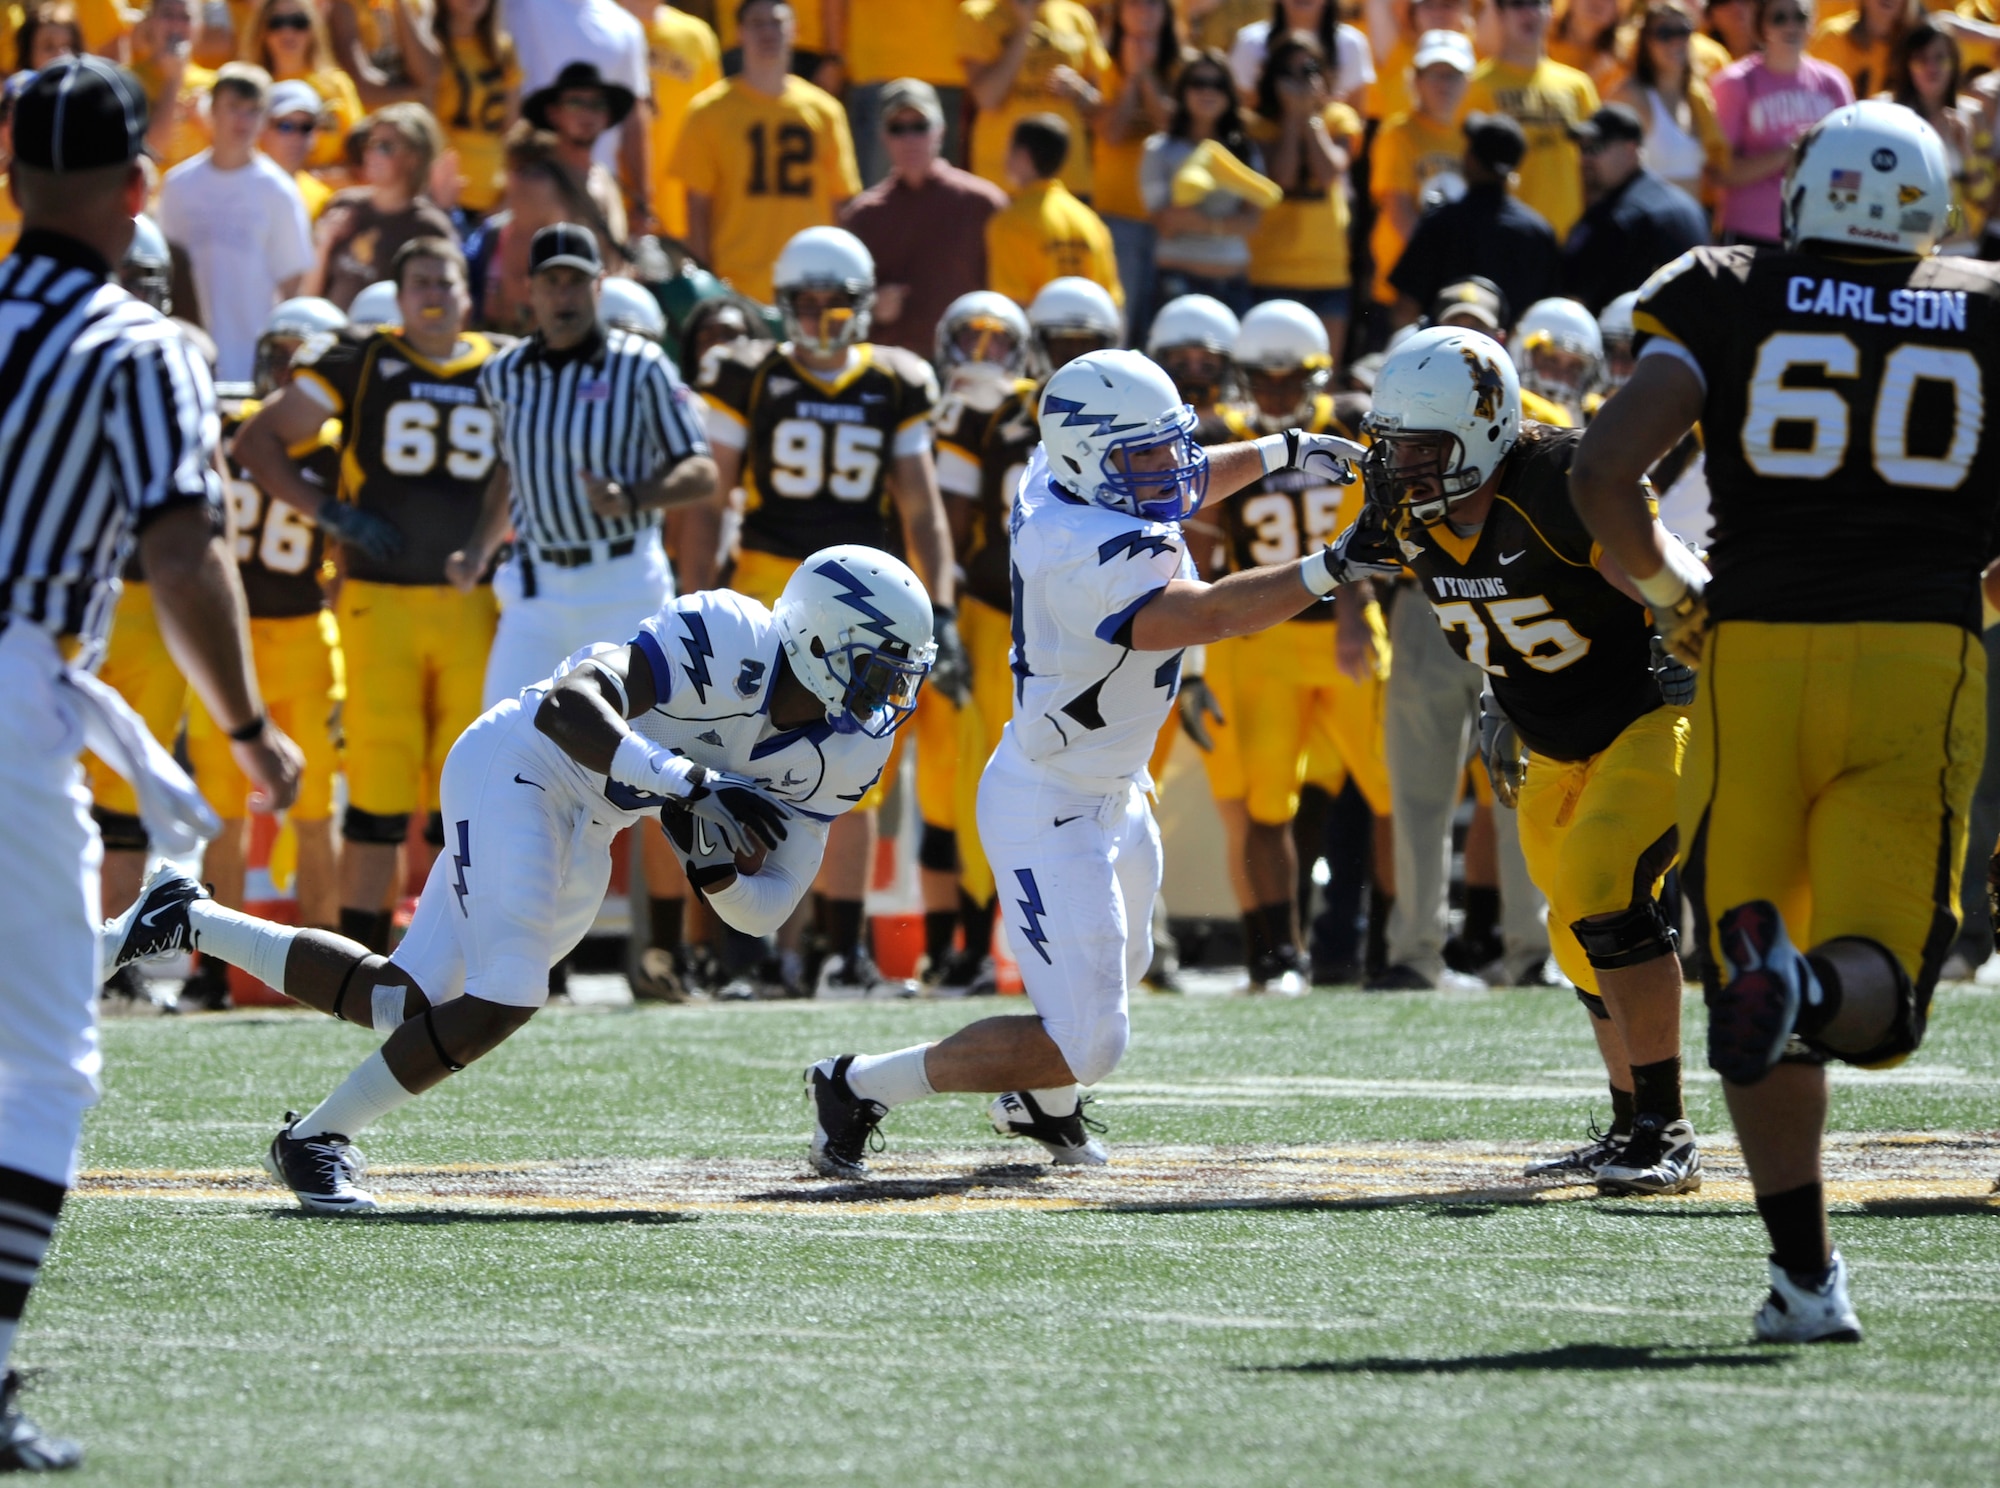 Falcons defensive back Jon Davis, left, returns an interception 23 yards during the Air Force-Wyoming match in Laramie, Wyo., Sept. 25, 2010. Davis, a Cincinnati native, also forced a fumble in the fourth quarter to crystalize Air Force's 20-14 win over the Cowboys. (U.S. Air Force photo/Dave Ahlschwede)